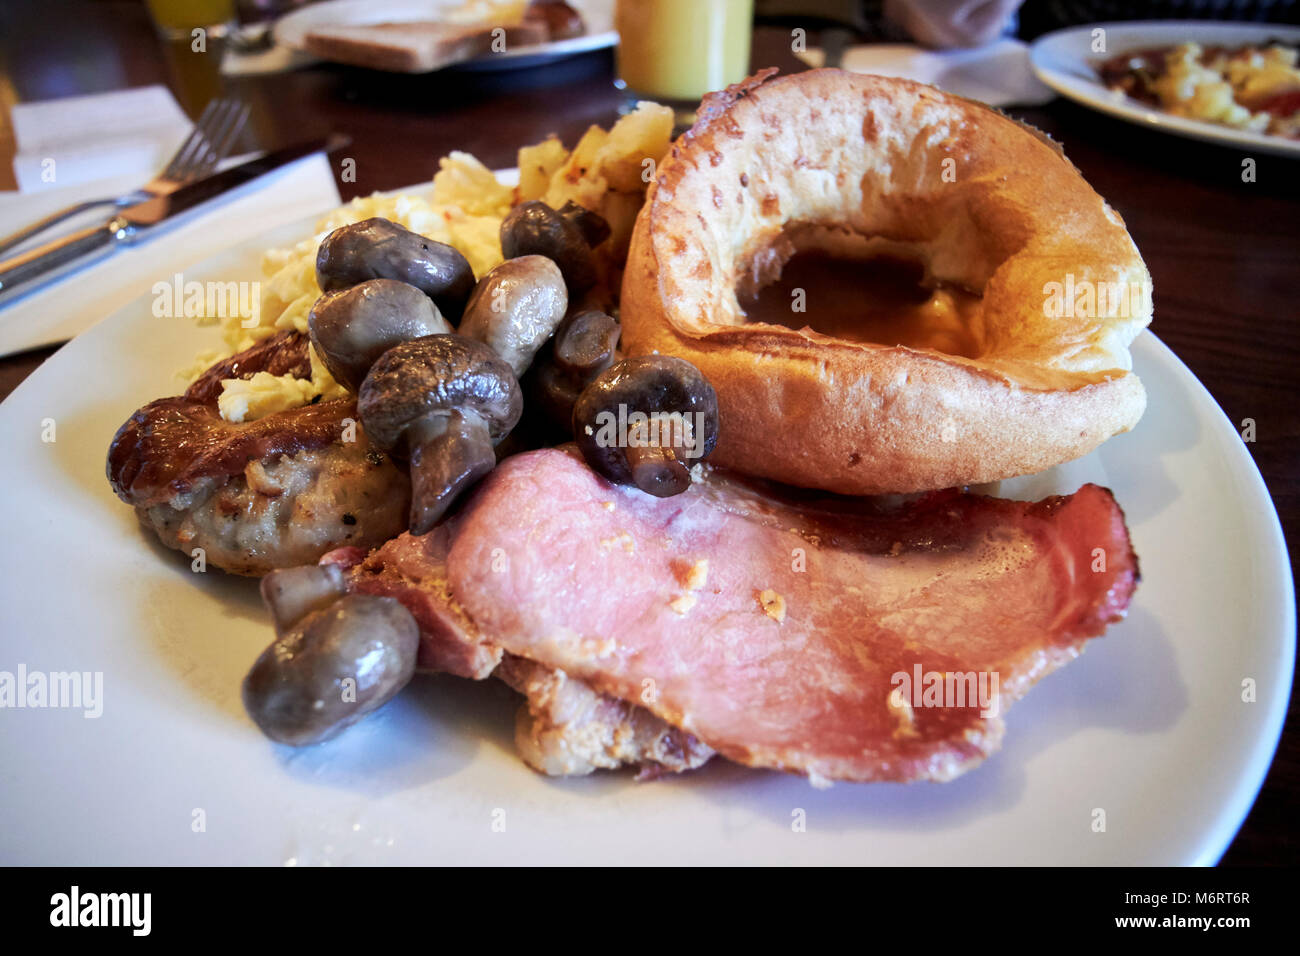 full plate at carvery all you can eat breakfast in the uk Stock Photo